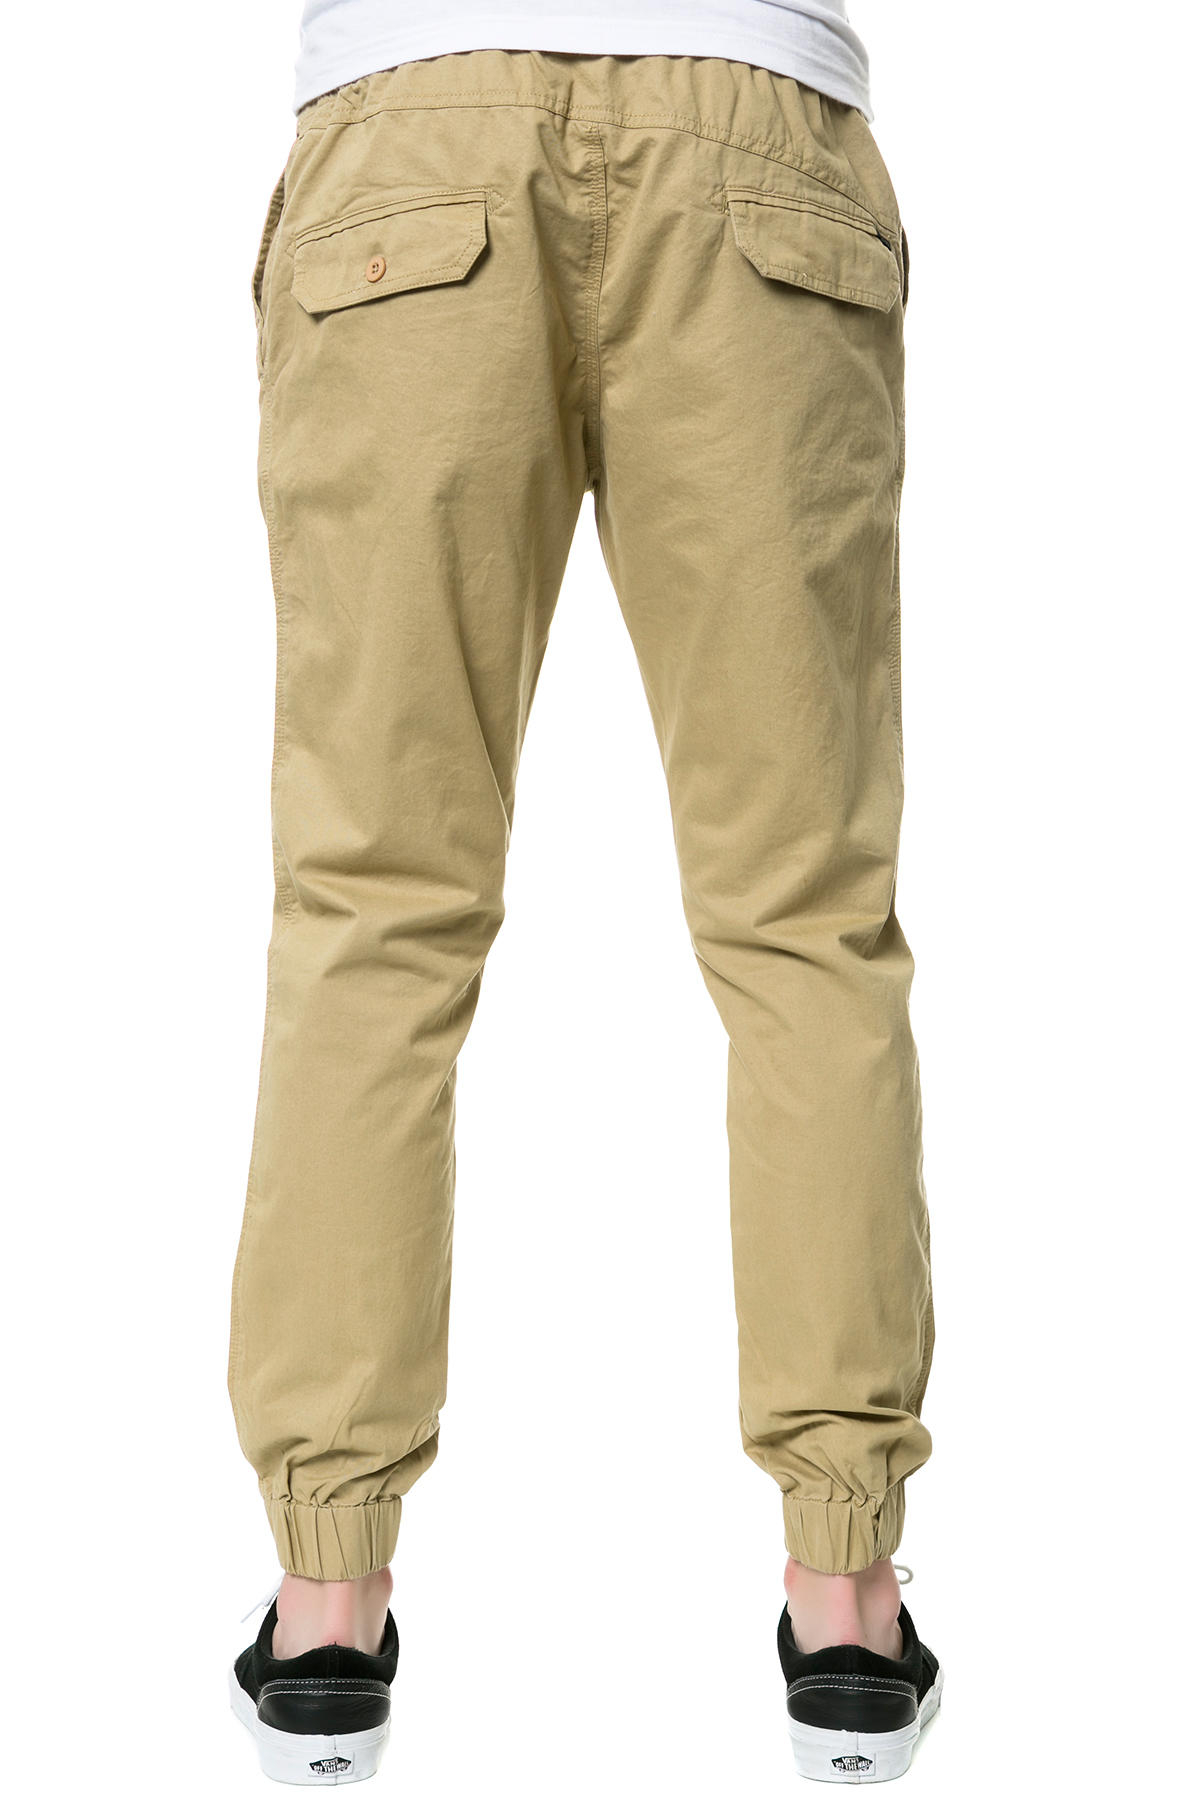 Lyst - Volcom The Stone Stack Pants in Natural for Men